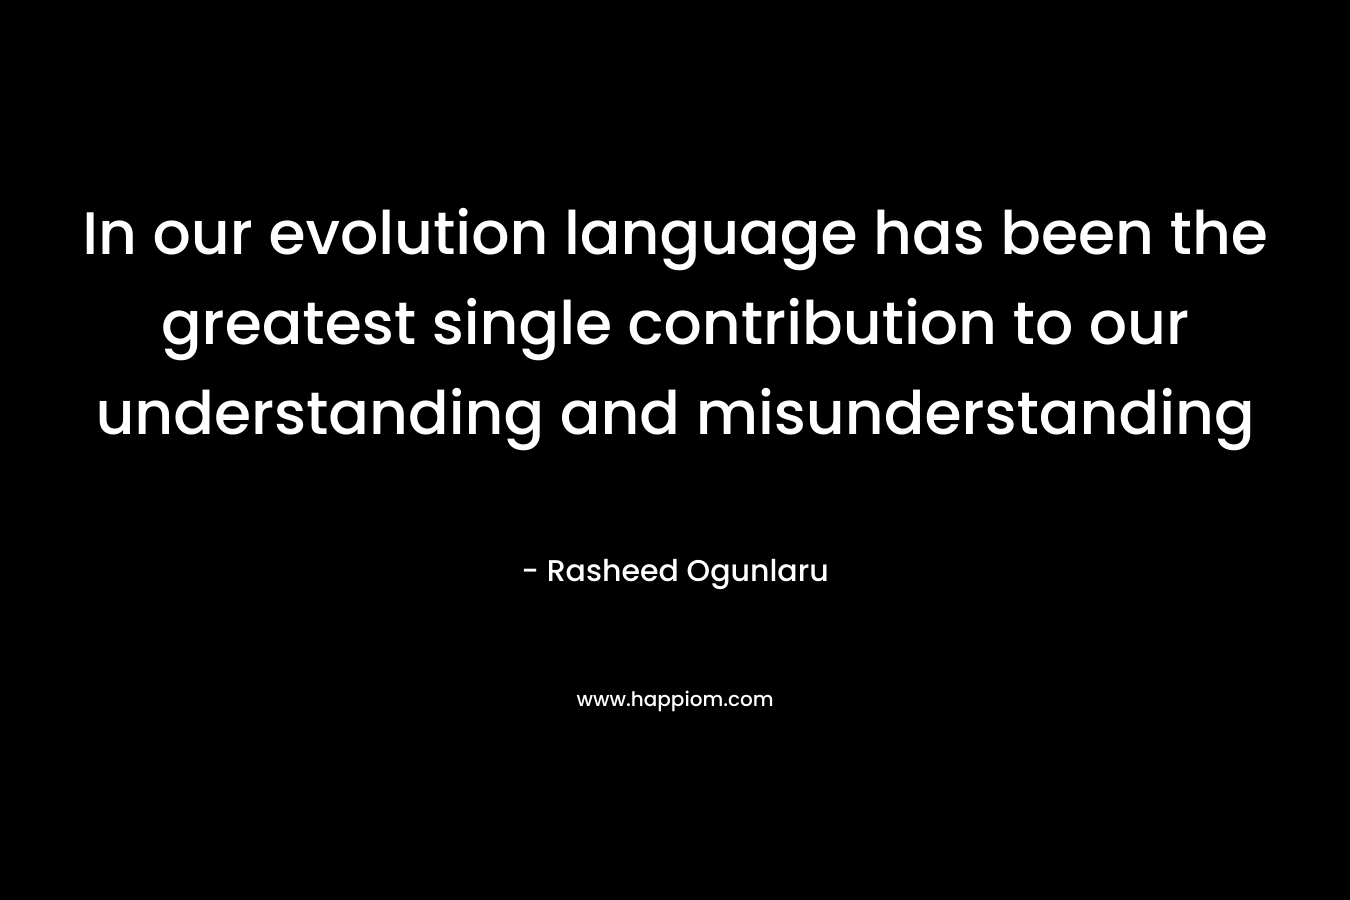 In our evolution language has been the greatest single contribution to our understanding and misunderstanding – Rasheed Ogunlaru